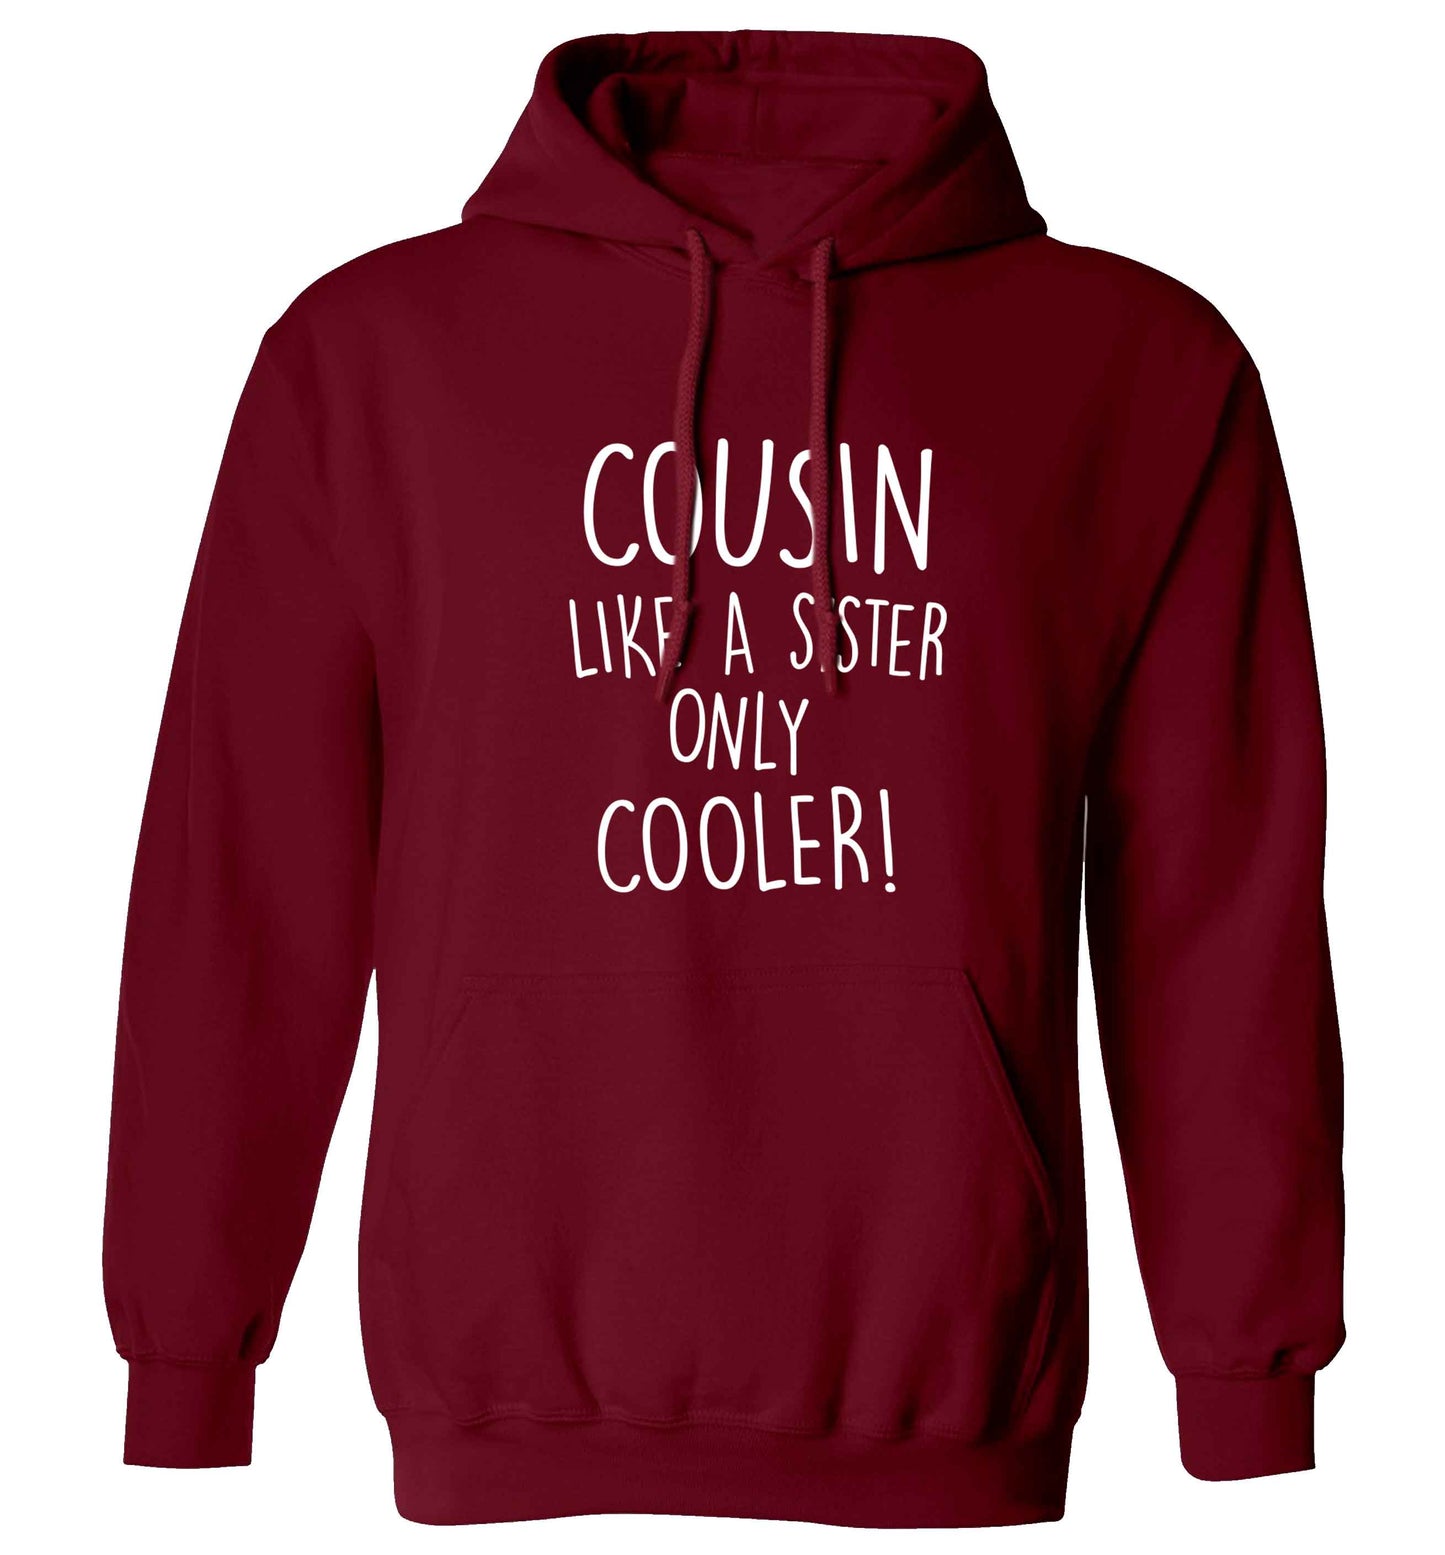 Cousin like a sister only cooler adults unisex maroon hoodie 2XL